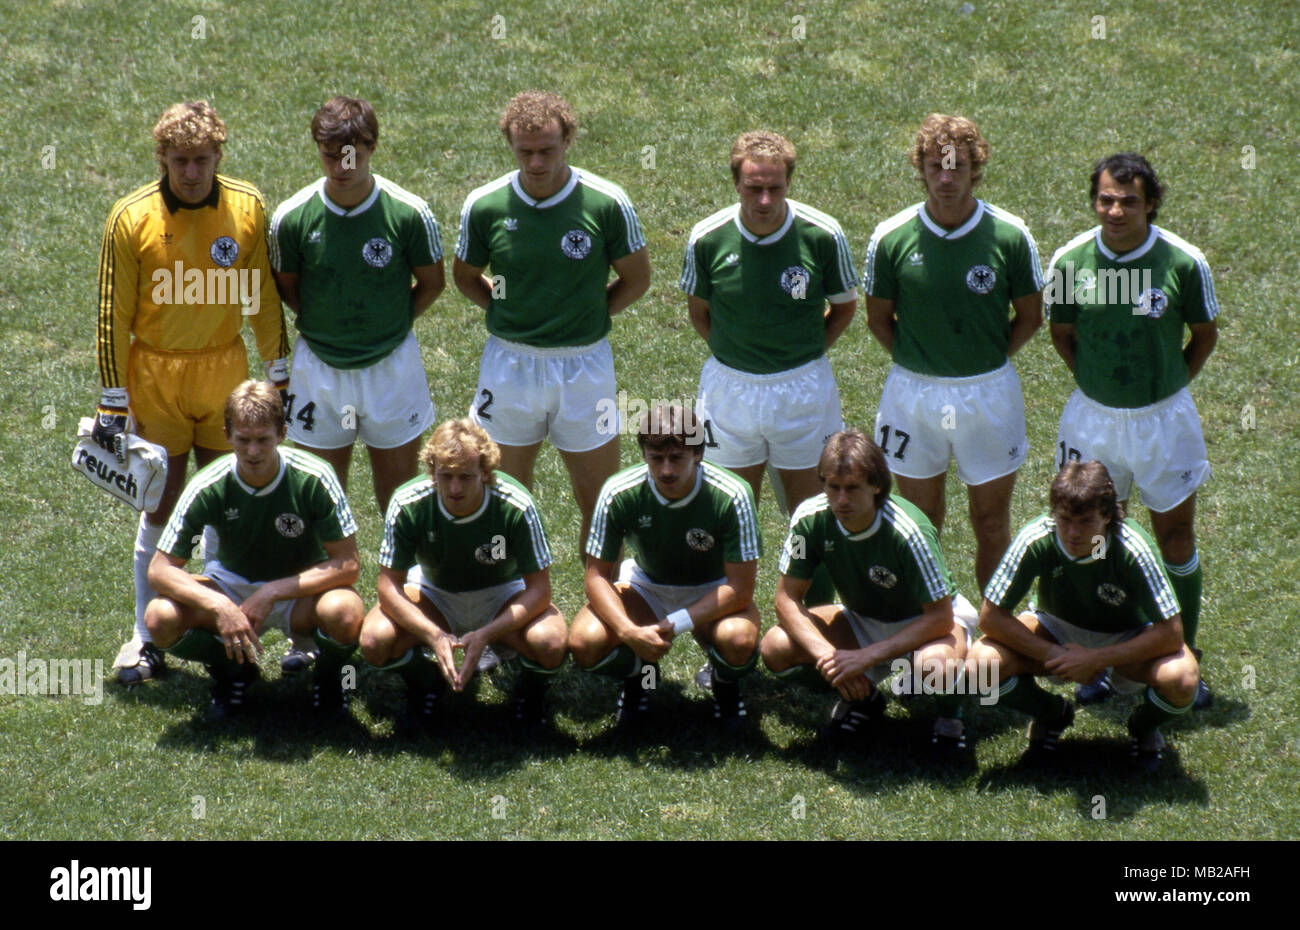 FIFA World Cup - Mexico 1986 29.6.1986, Estadio Azteca, Mexico, D.F. Final Argentina v West Germany. Germany starting line up, back row, left to right: Harald Schumacher, Thomas Berthold, Hans-Peter Briegel, Karl-Heinz Rummenigge, Ditmar Jakobs, Felix Magath. Front, l to r: Karlheinz Fster, Andreas Brehme, Klaus Allofs, Norbert Eder, Lothar Matths. Stock Photo